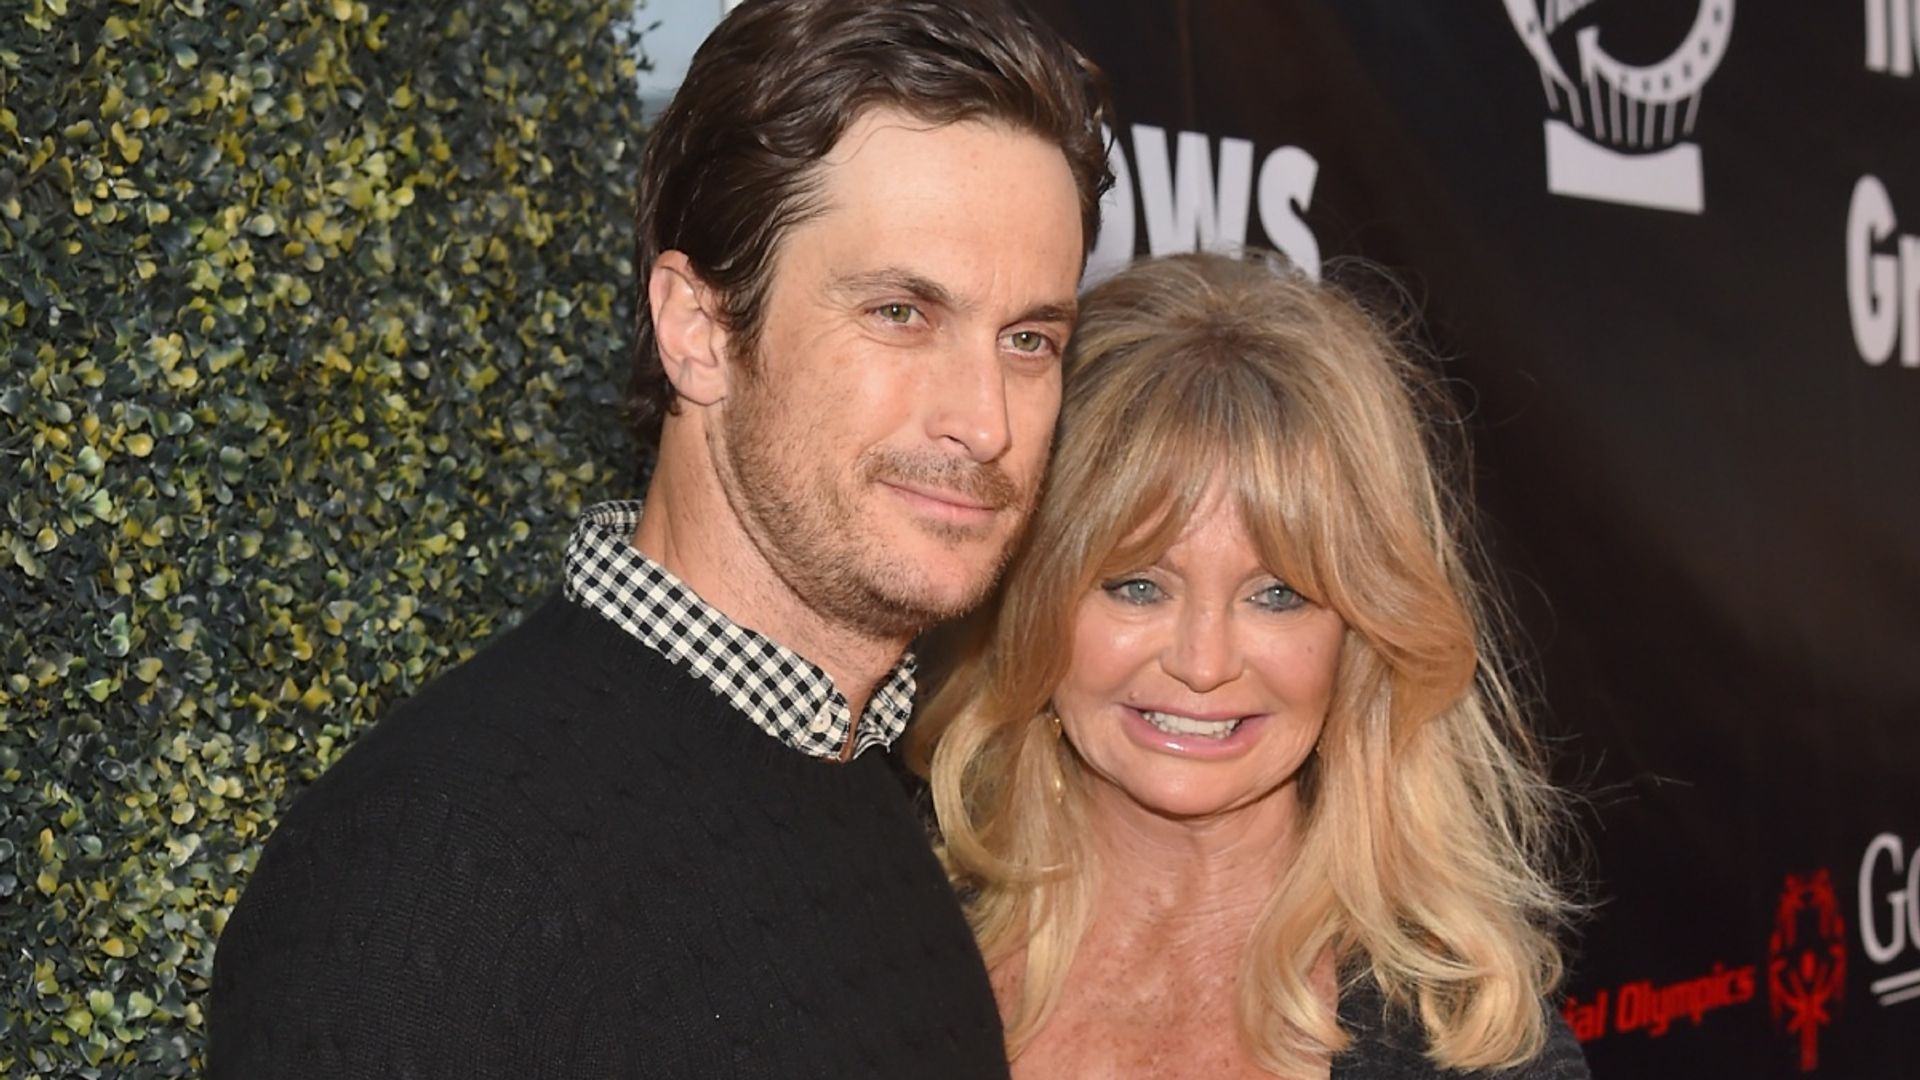 Oliver Hudson teases departure from beloved project leaving viewers disappointed